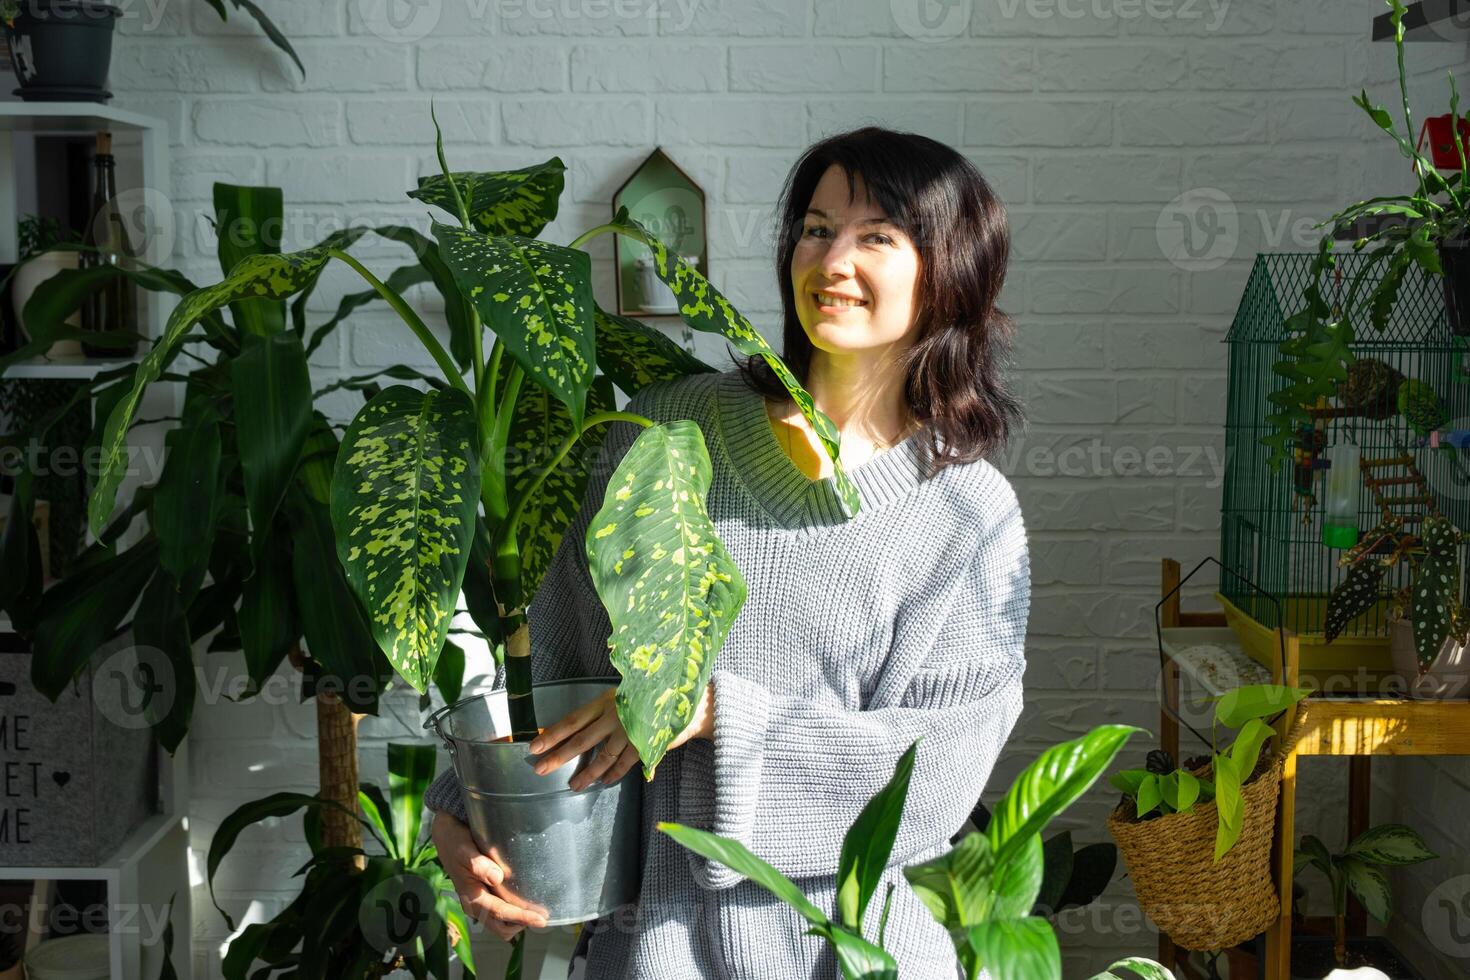 Repotting and caring home plant dieffenbachia Cheetah into new pot in home interior. Woman breeds and grows plants as a hobby, holds Varietal diffenbachia with large spotted leaves, large size photo